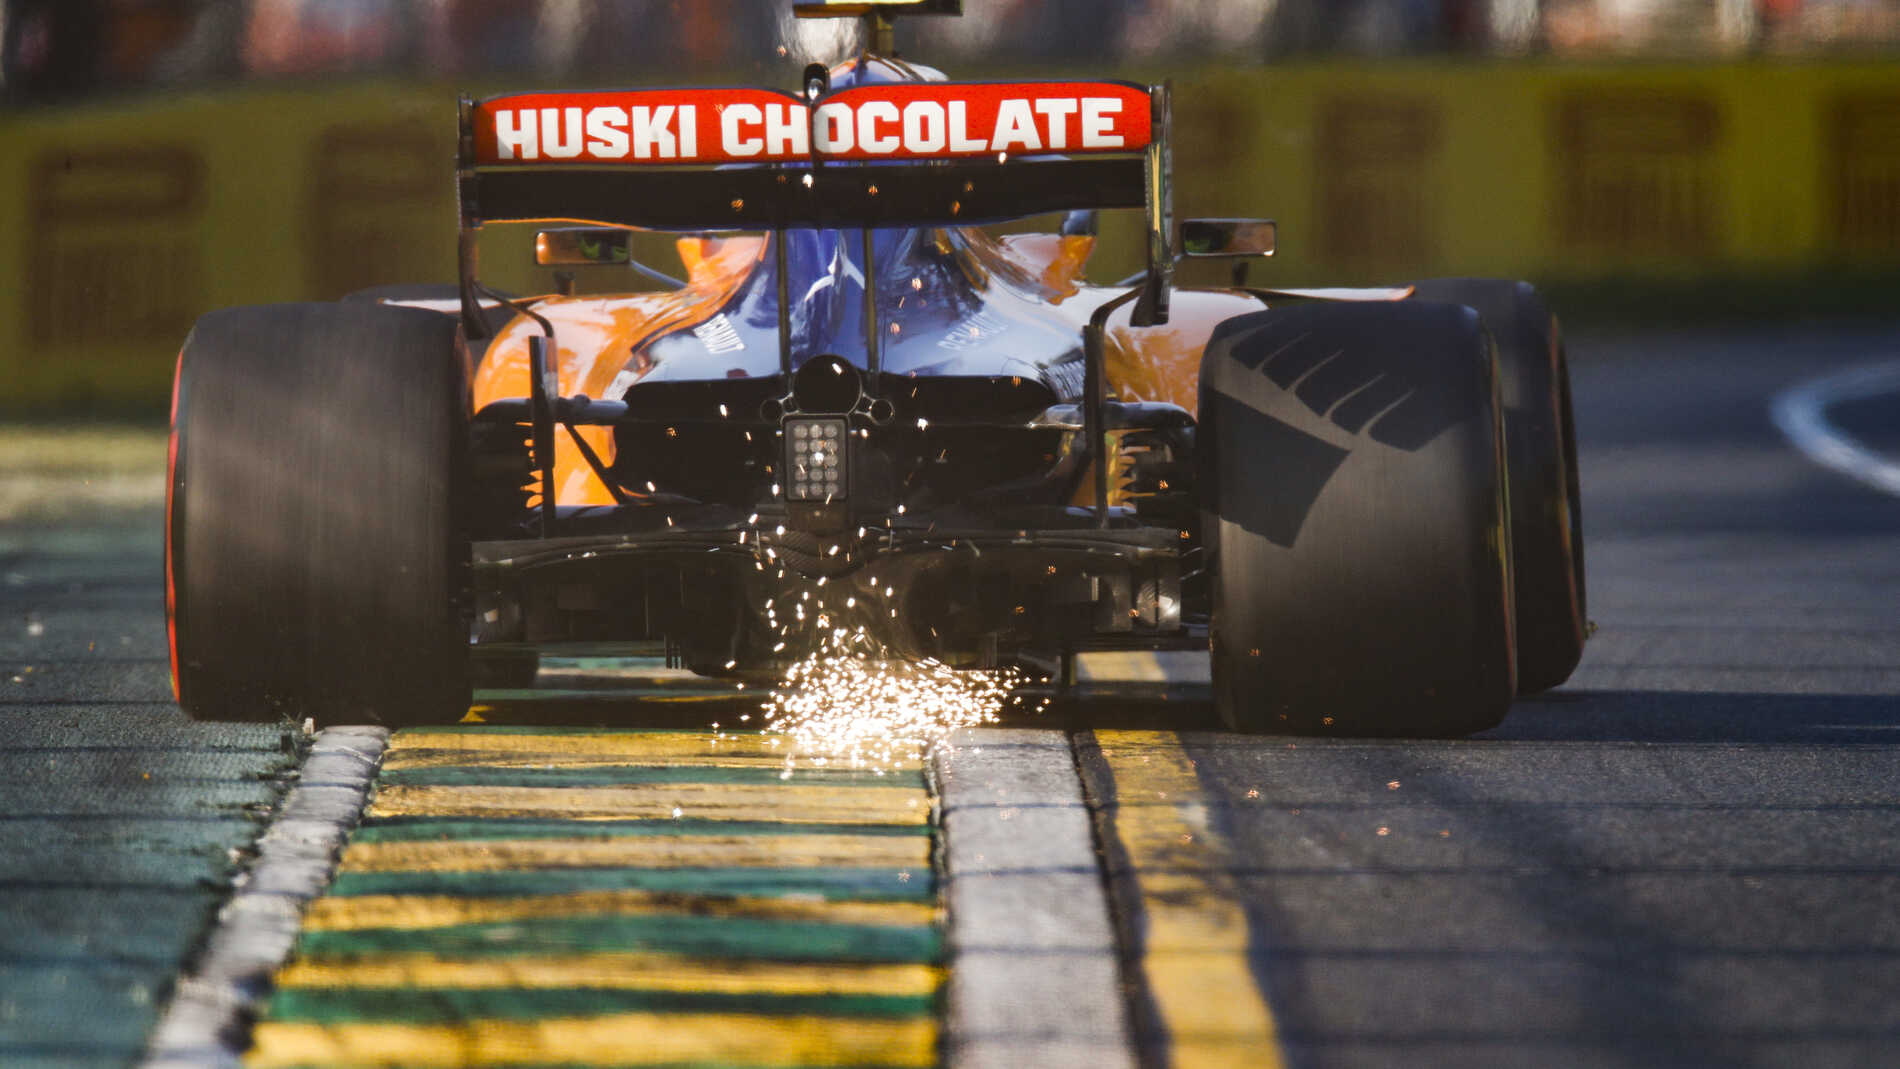 What to Watch For in the 2019 Australian Grand Prix 5 key storylines for Sundays race Formula 1®